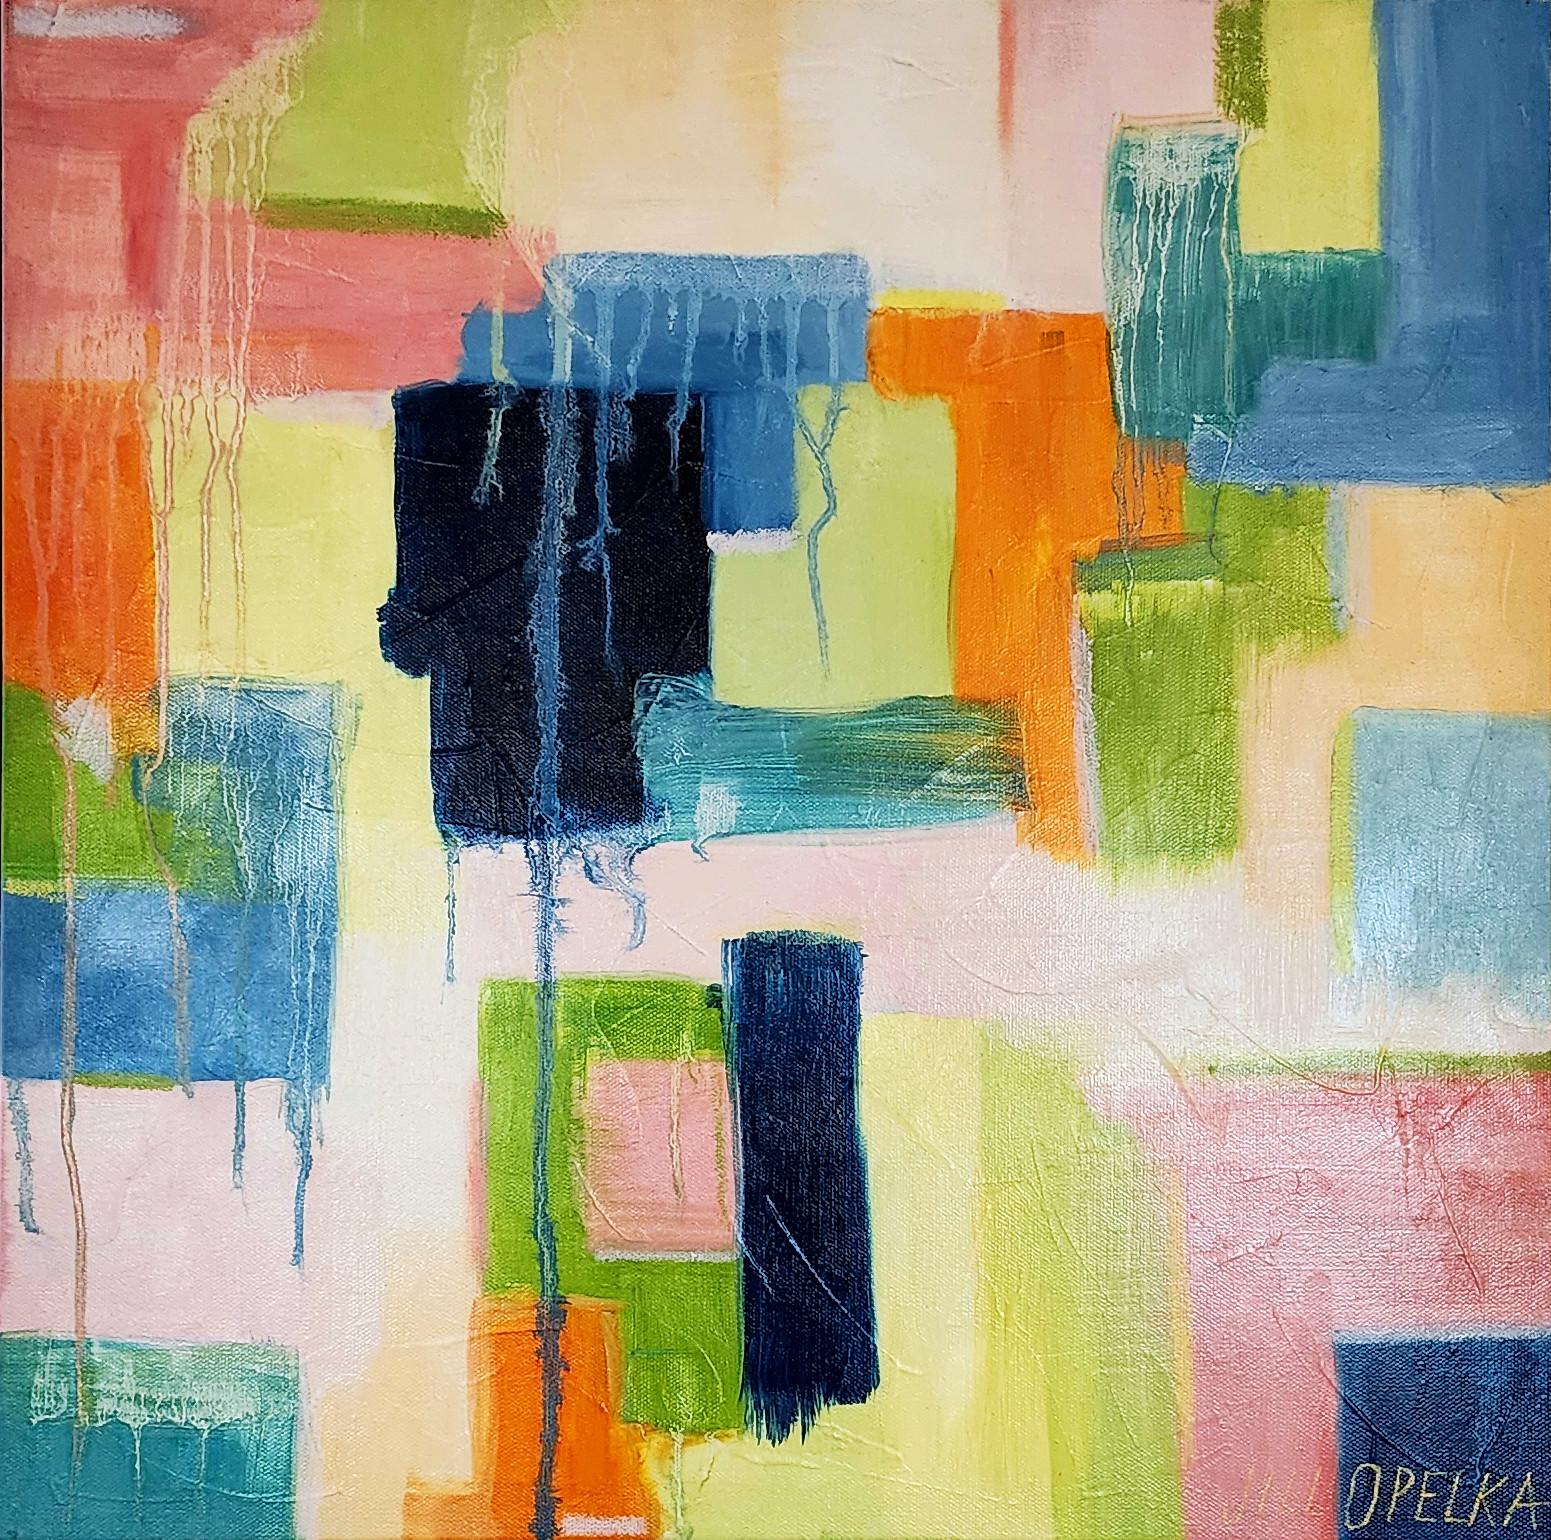 Jill Opelka Abstract Painting - Abstract IV (Abstract, Vibrant, Deep, Blue, Navy, Green, Orange, Pink, 30% OFF)